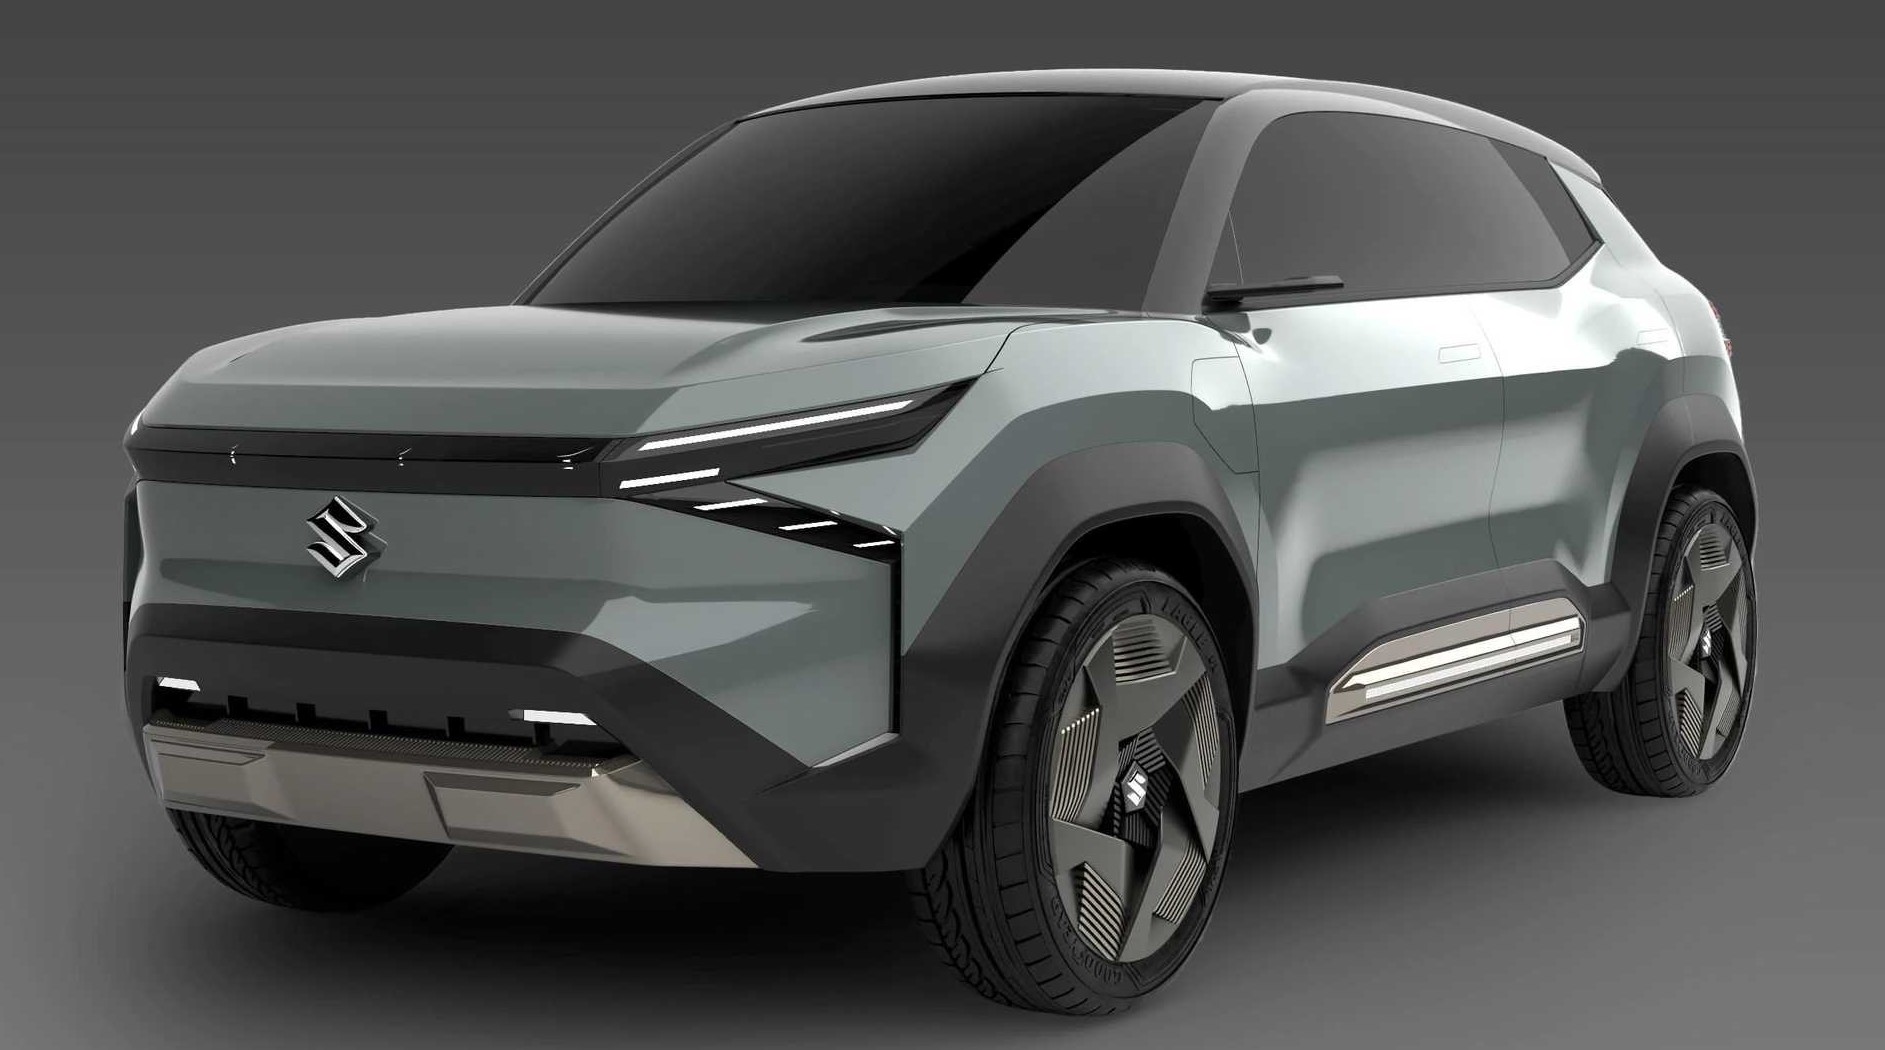 The new 2023-2025 Suzuki Evx, the SUV that marked a turning point in the brand’s design and quality